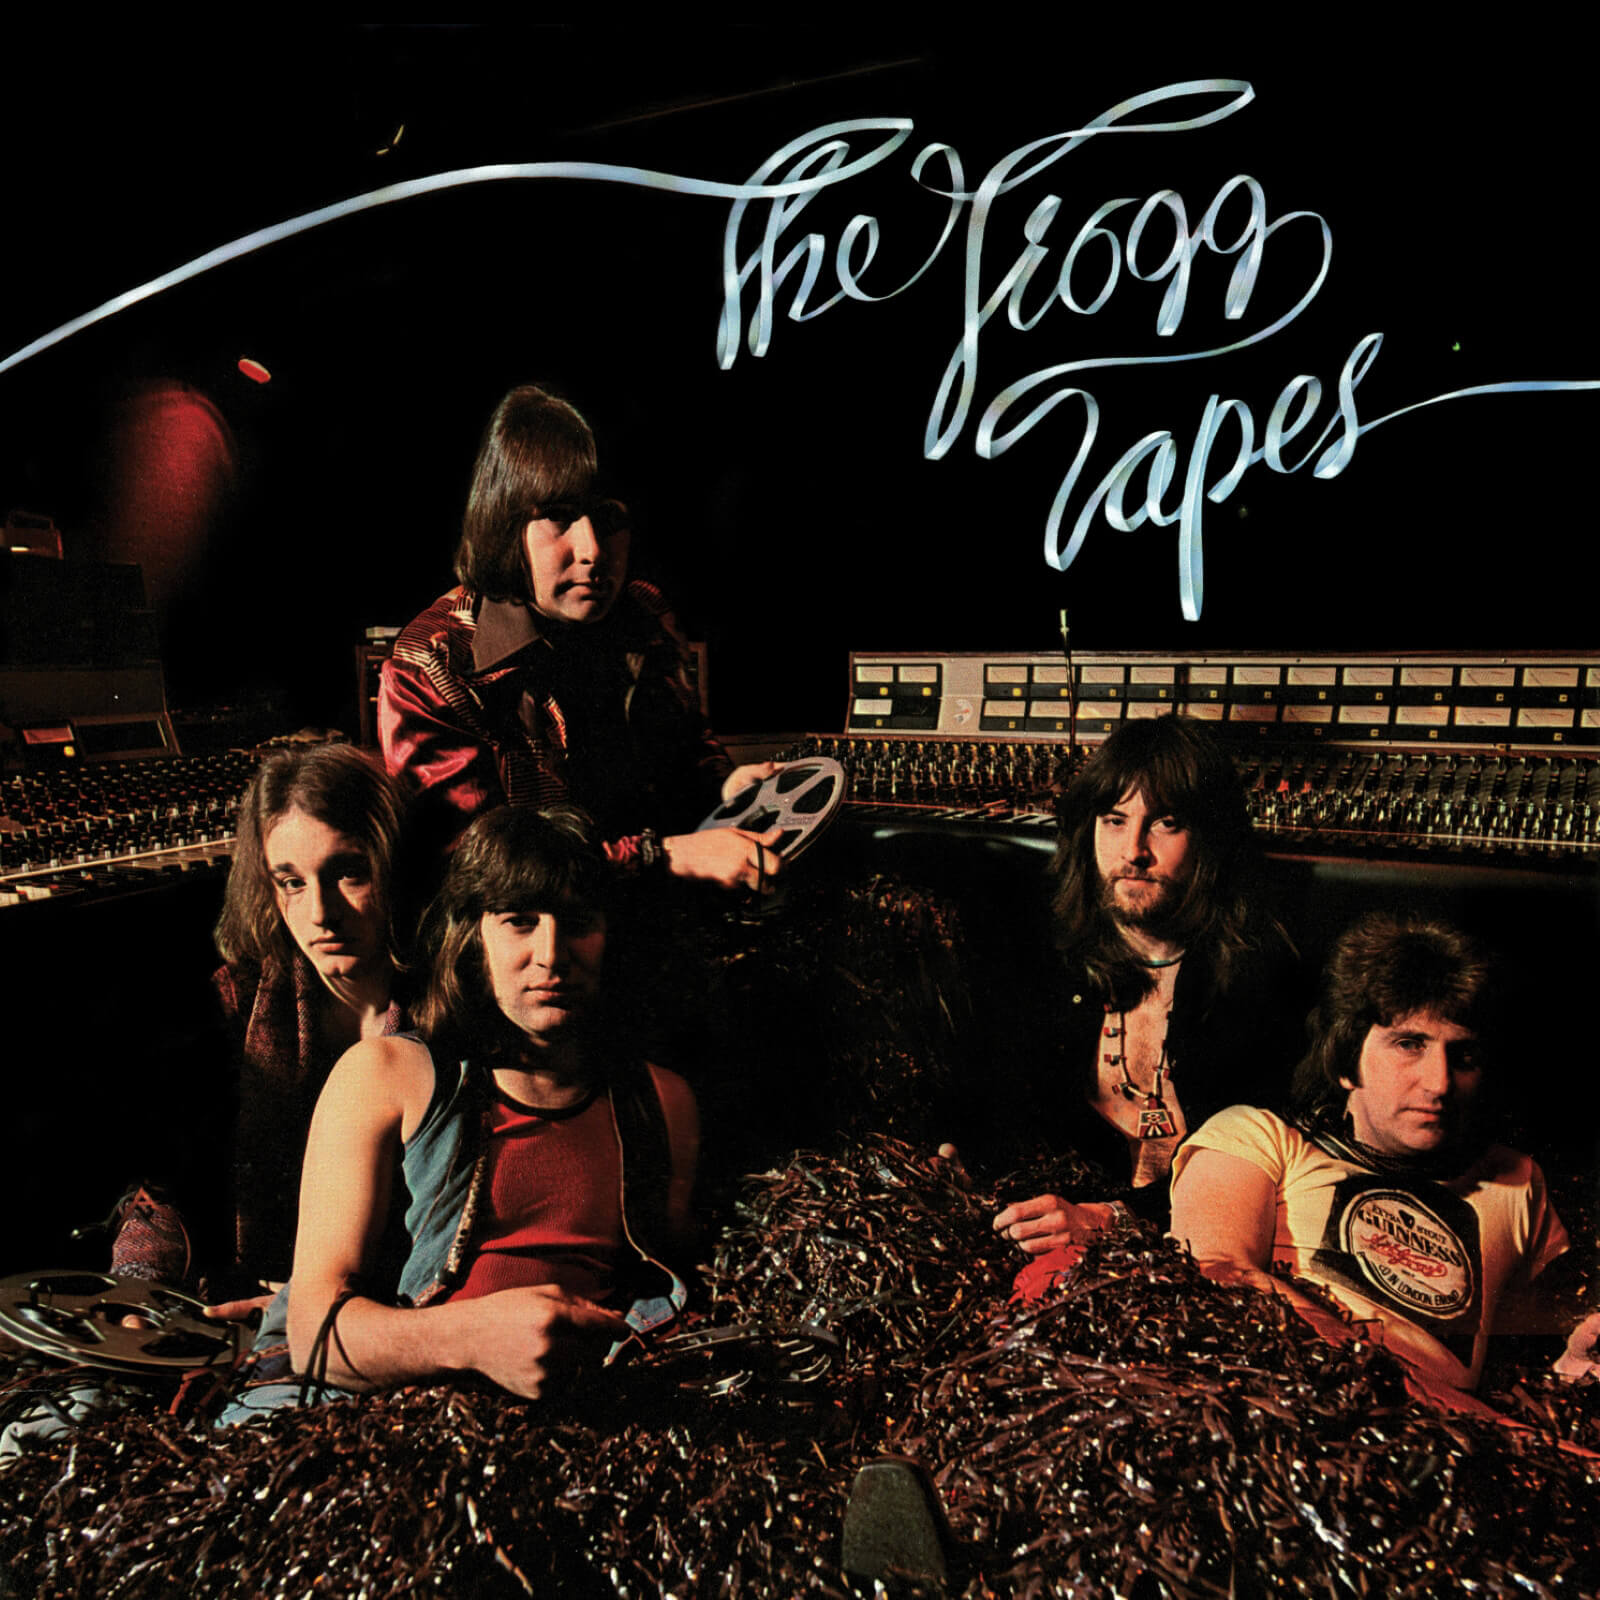 The Troggs - The Trogg Tapes LP